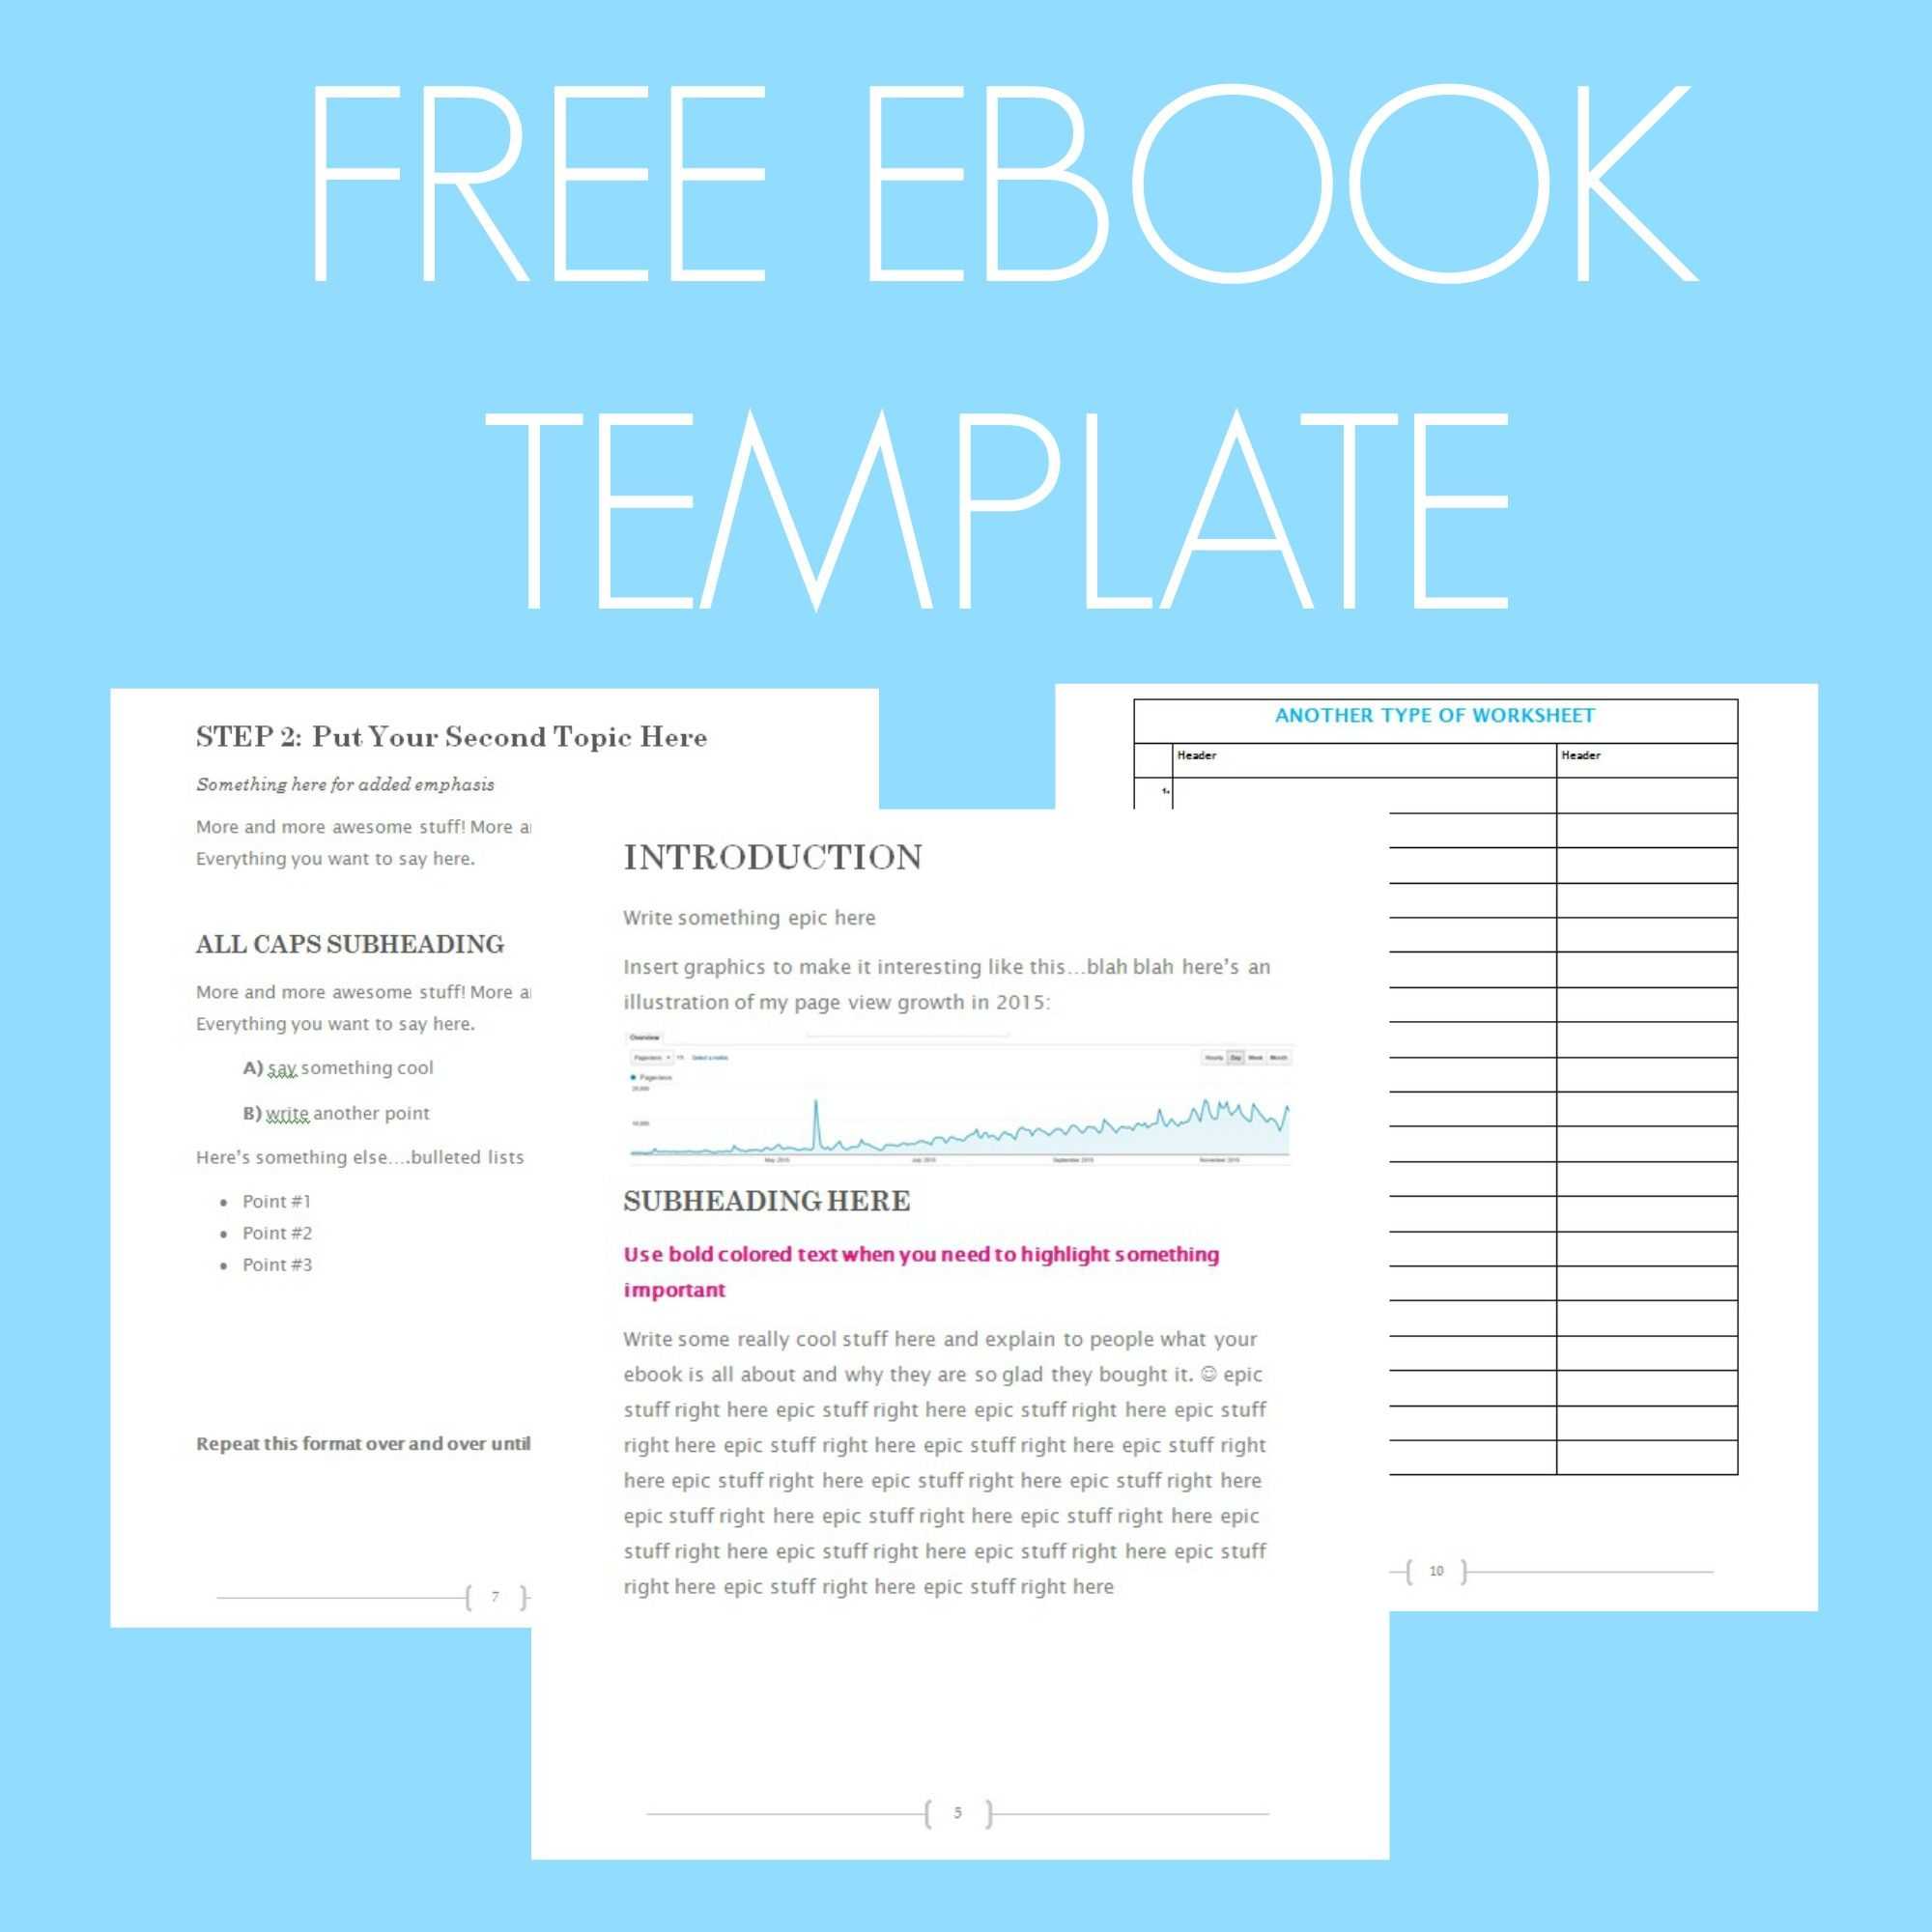 Free Ebook Template – Preformatted Word Document | Writing For Another Word For Template